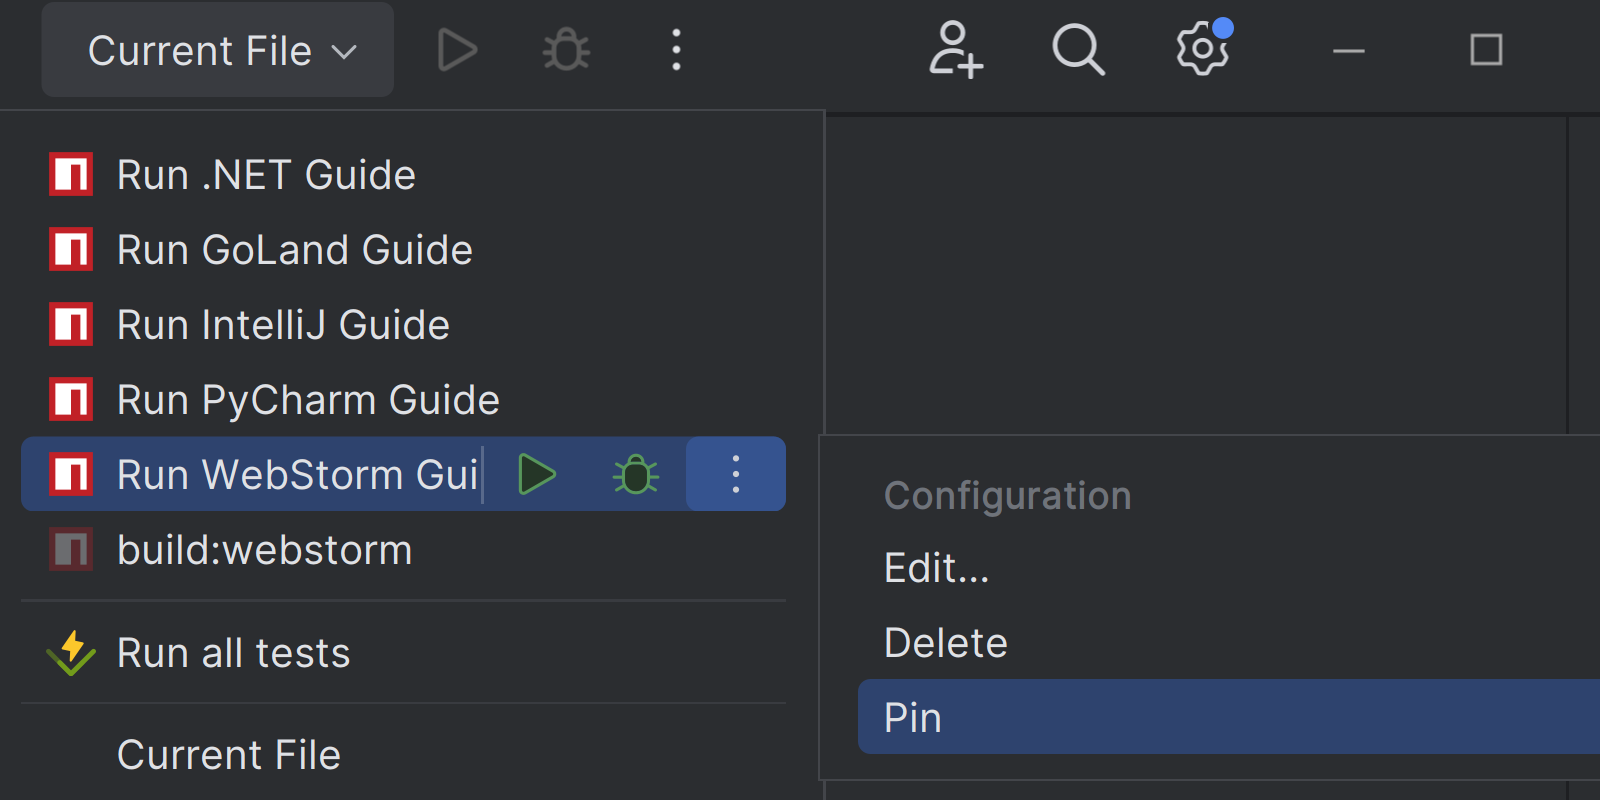 Showing the pin option for run configurations